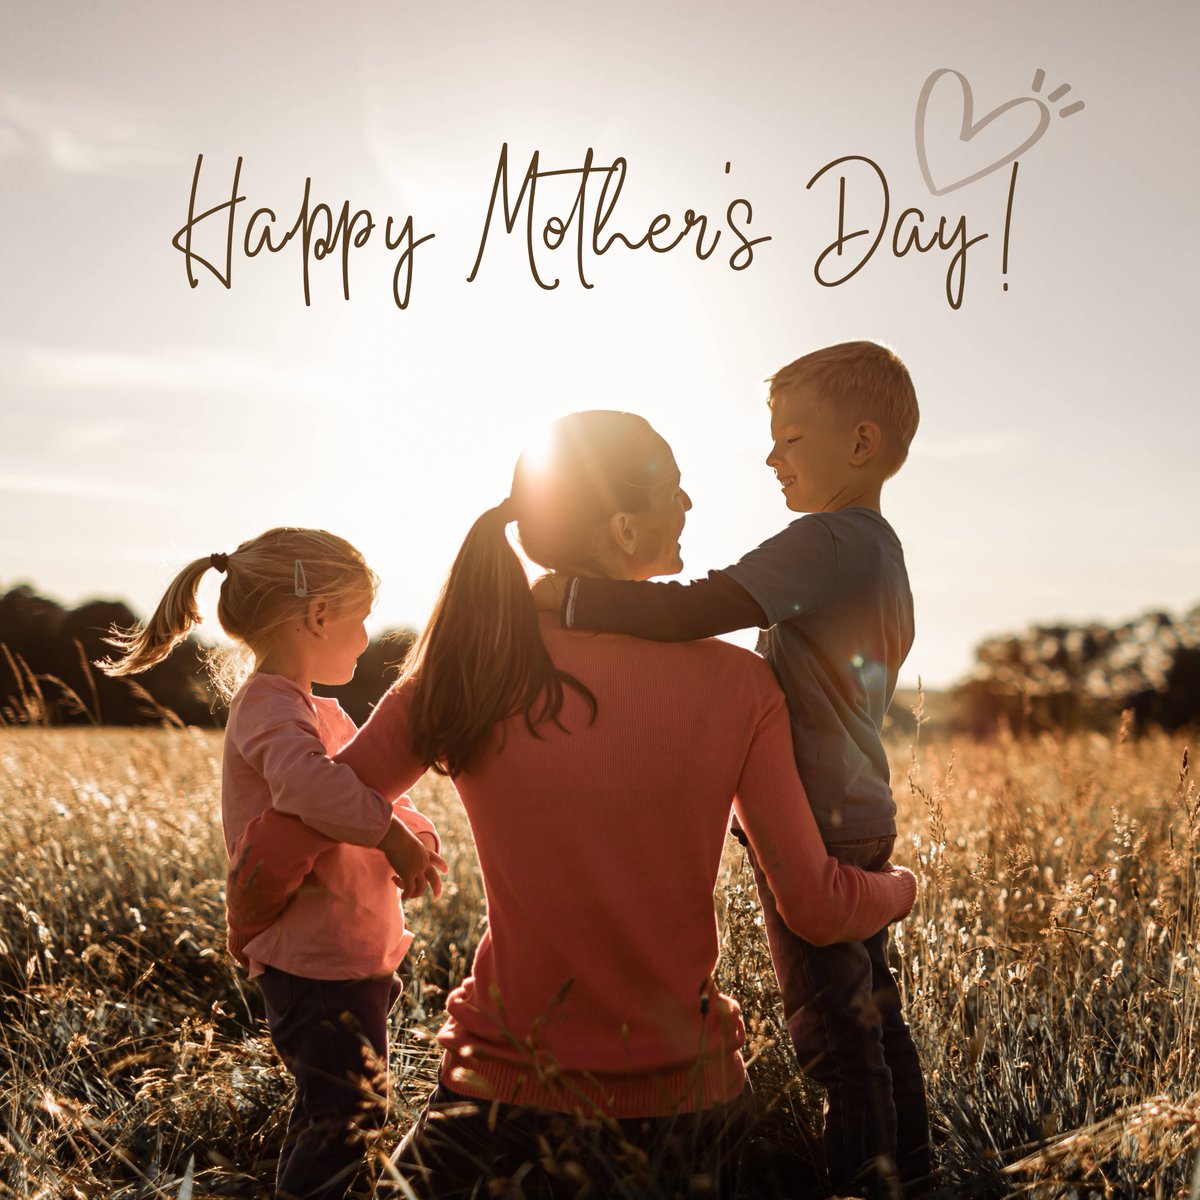 To all moms out there… may your embrace always be full of the people you love!

#HappyMothersDay
#Halkidiki #VisitGreece